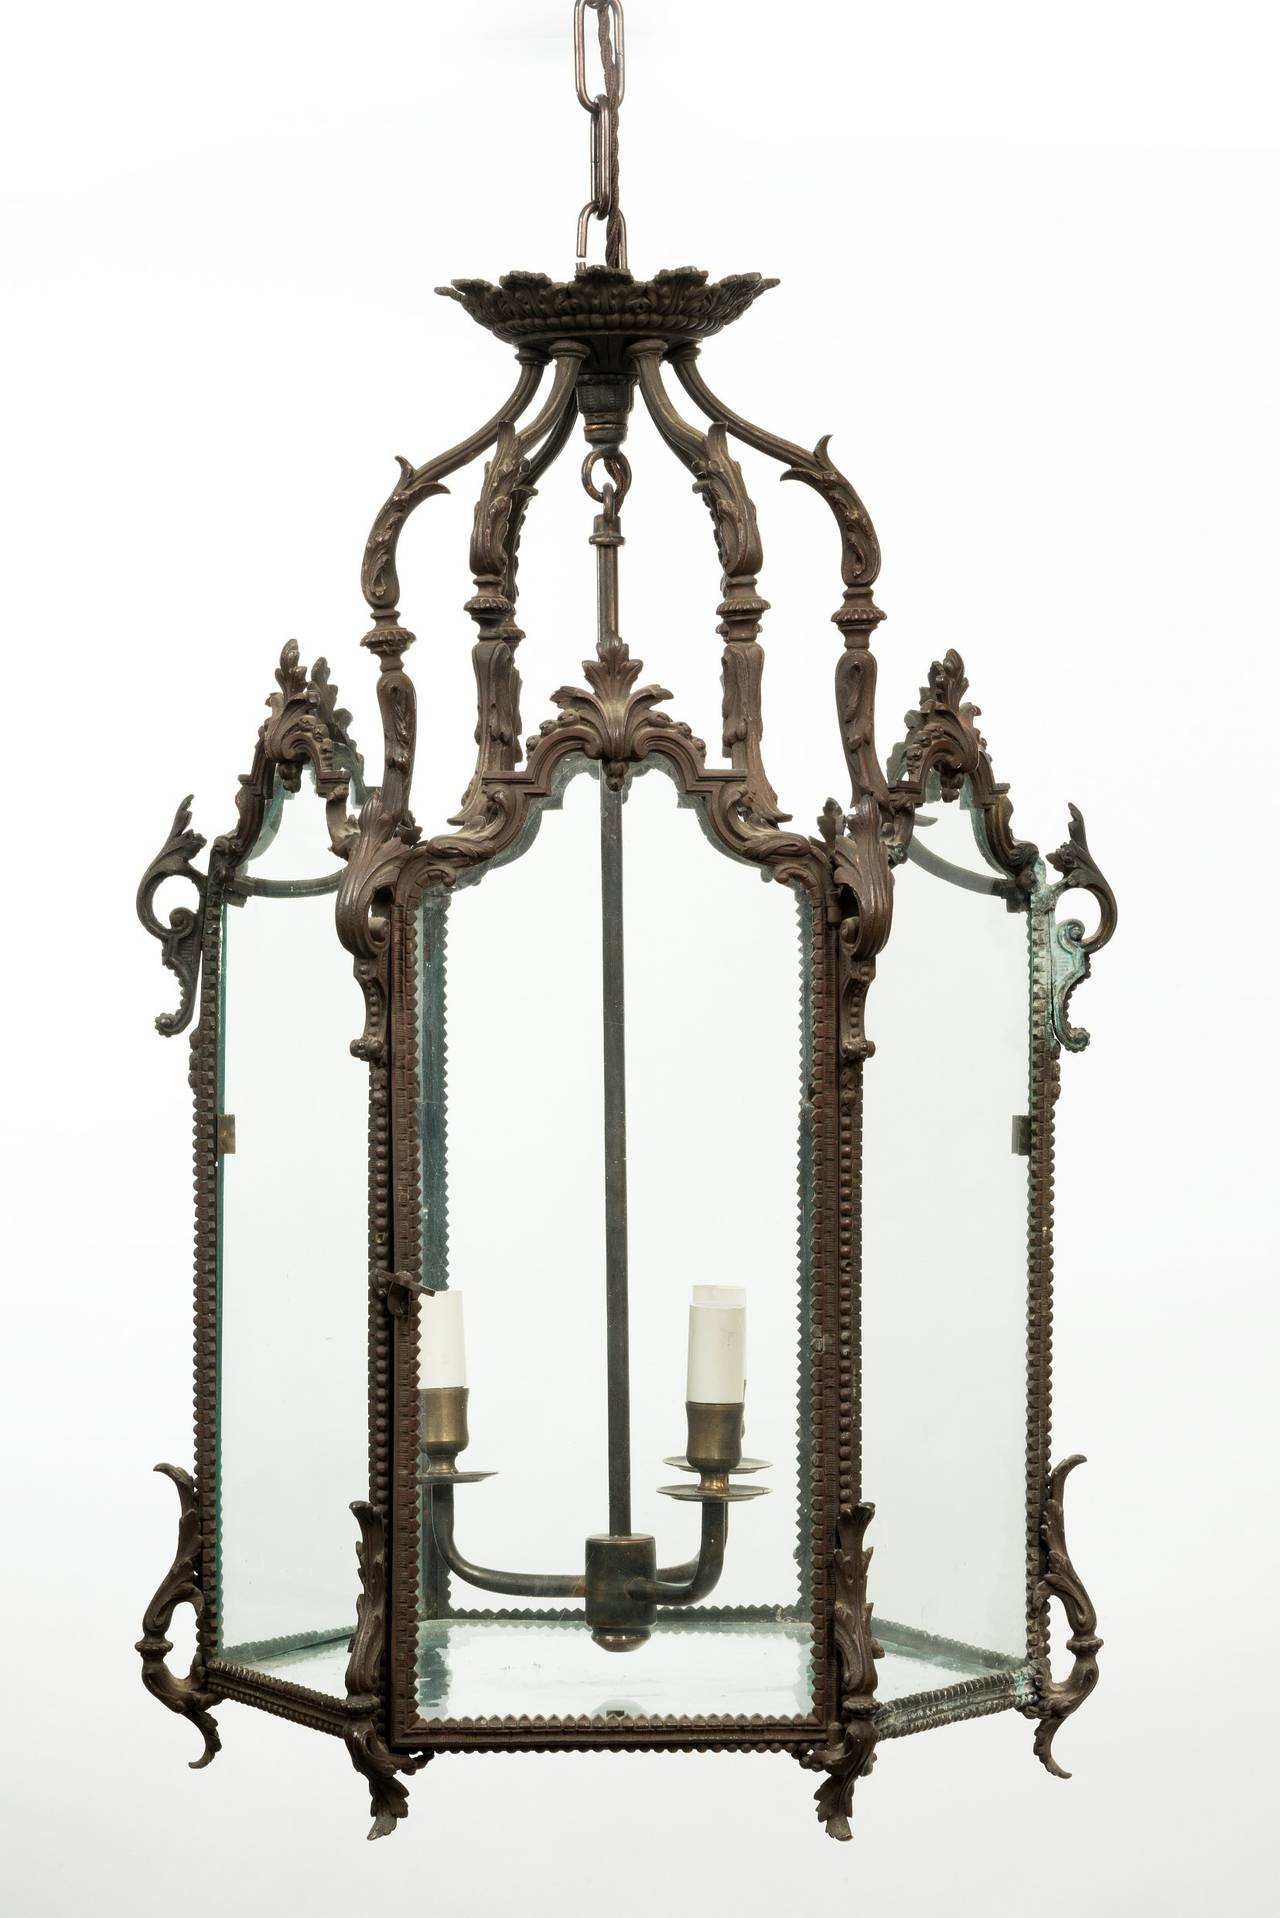 A good quality 19th century patinated bronze octagonal hall lantern, with scrolled supports and a finely cast corona; the whole has been re-wired ready to hold three light candle-bulbs